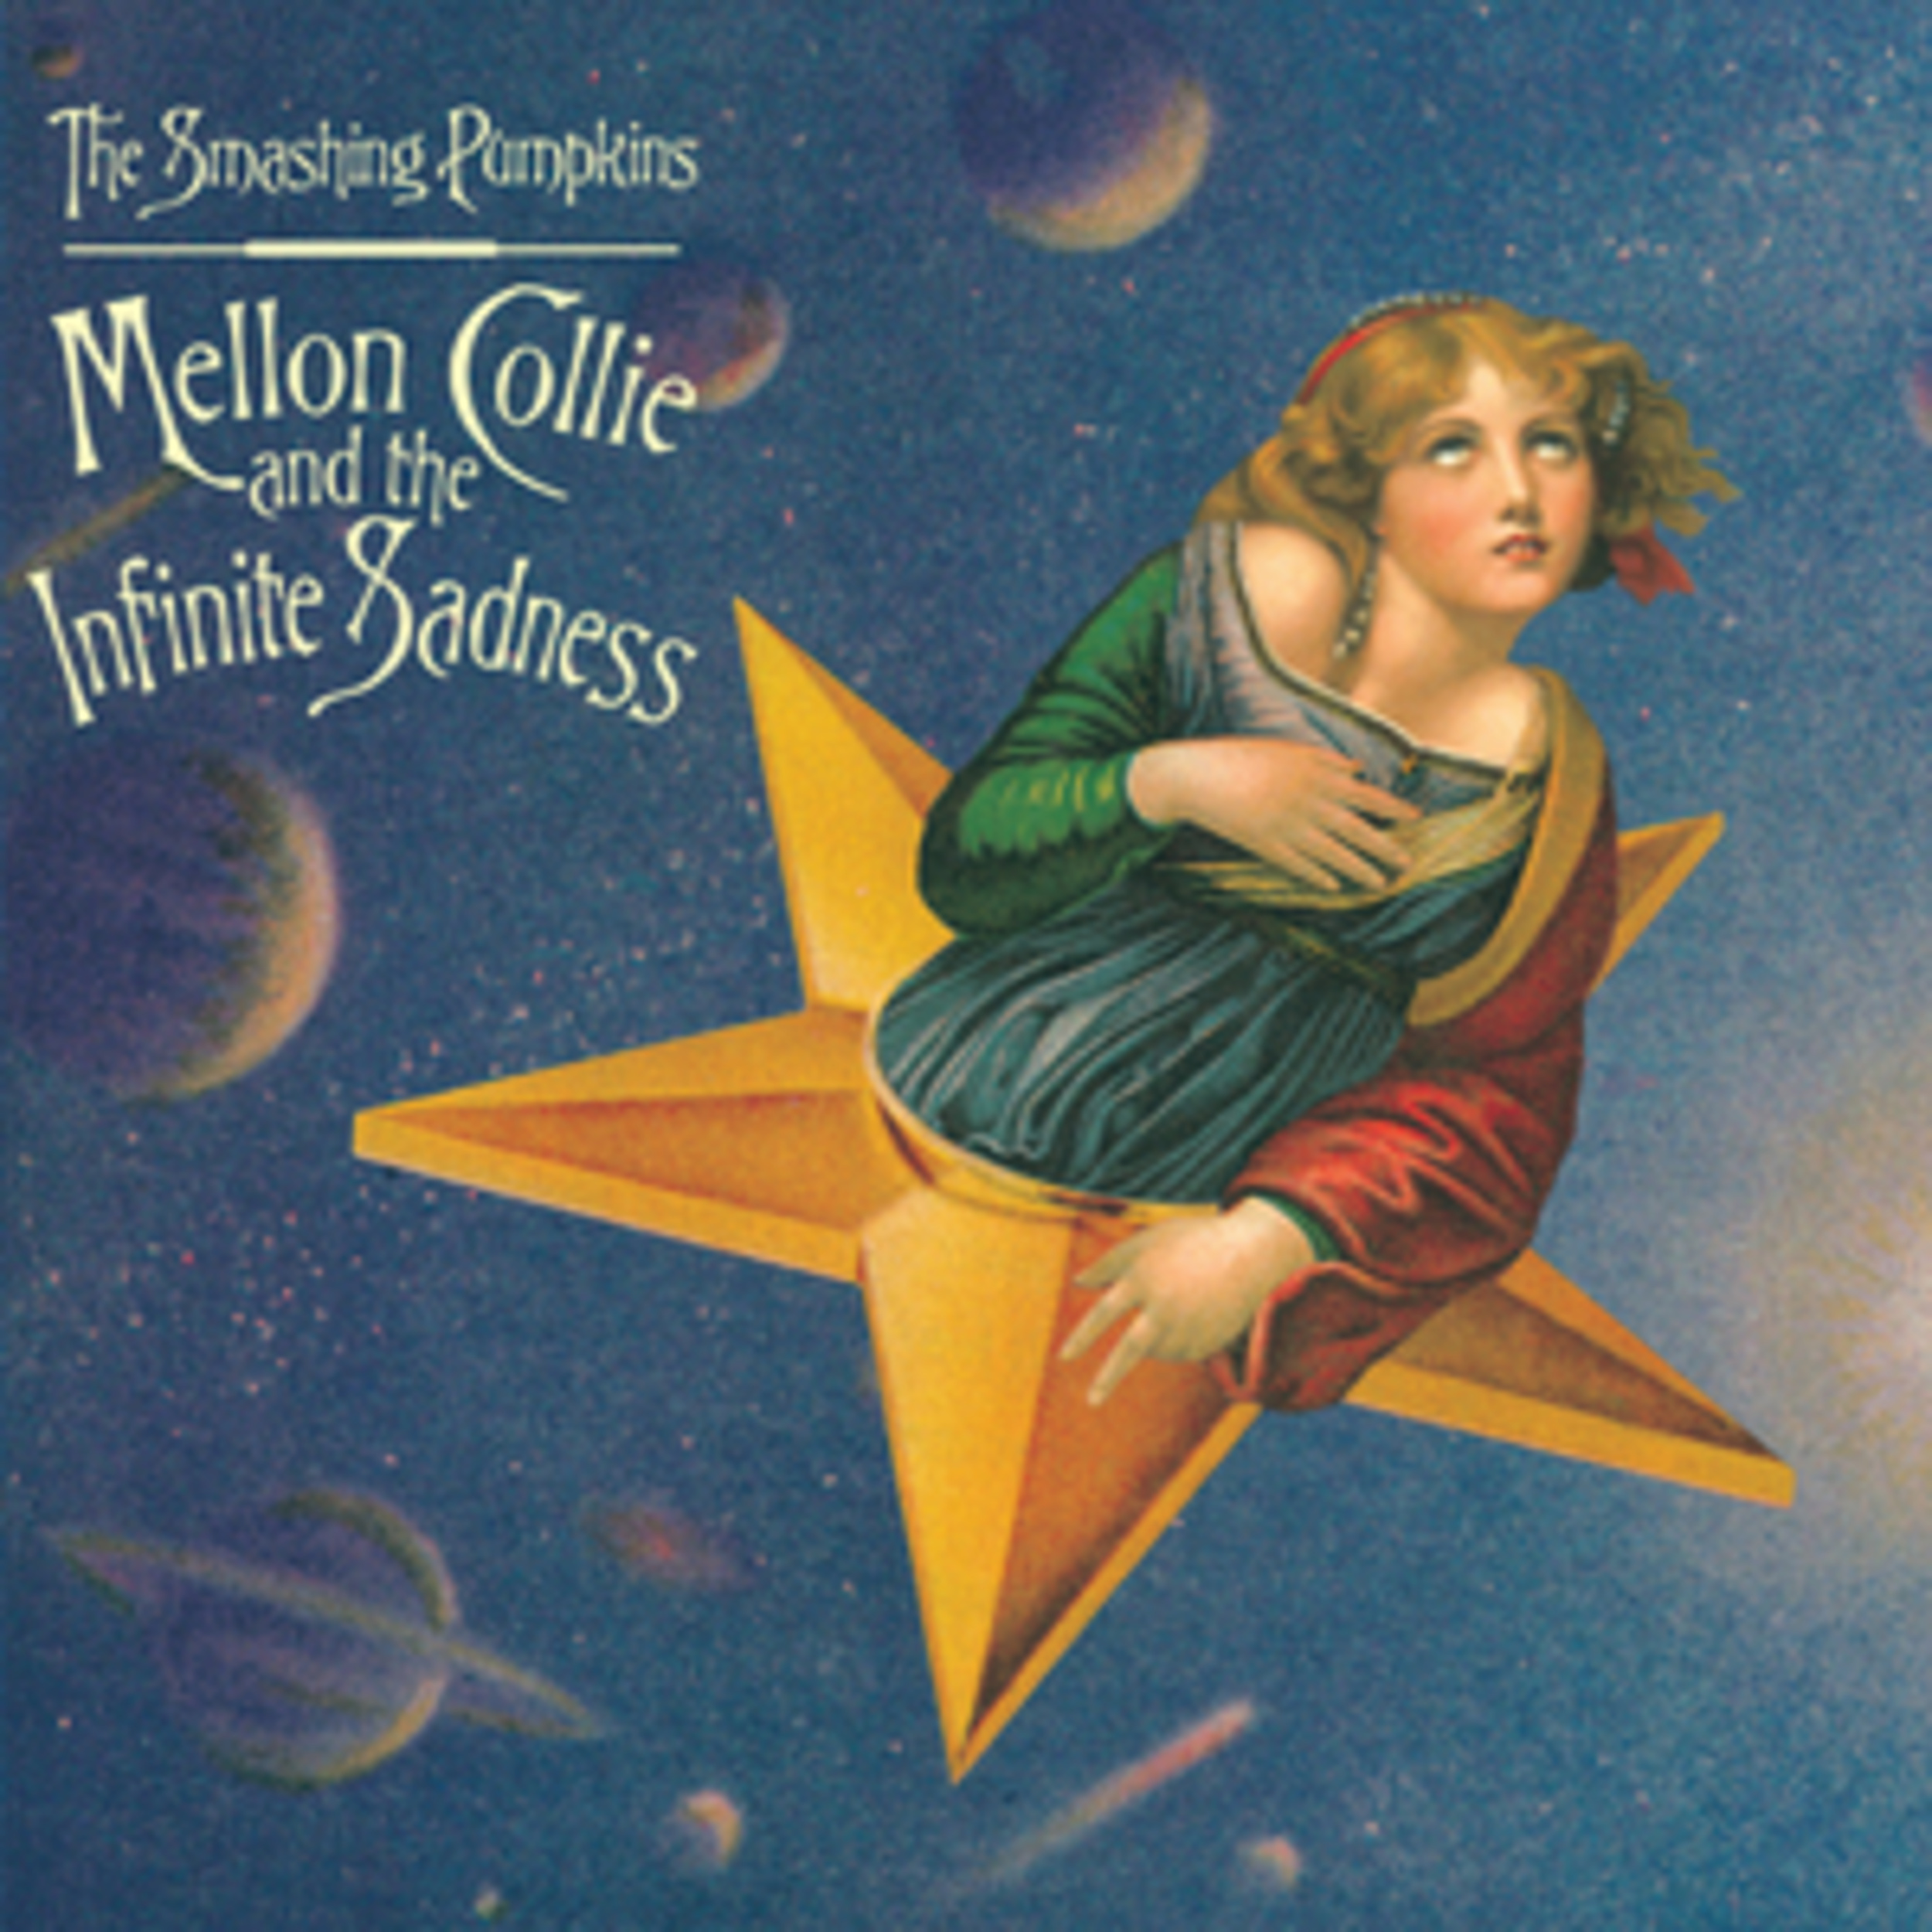 <p>Another memorable moment from <em>Mellon Collie and the Infinite Sadness</em>. The track is all about nostalgia. A coming-of-age song. It happens to be<a href="https://www.youtube.com/watch?v=4aeETEoNfOg"> one of the Pumpkins' more innovative tunes</a> filled with samples and looping that was pretty unique during that point in the band's tenure. It didn't seem to fit with the dreamy and somewhat metaphysical <em>Mellon Collie </em>concept, but it's a two-time Grammy nominee and one of the group's most popular songs.</p>